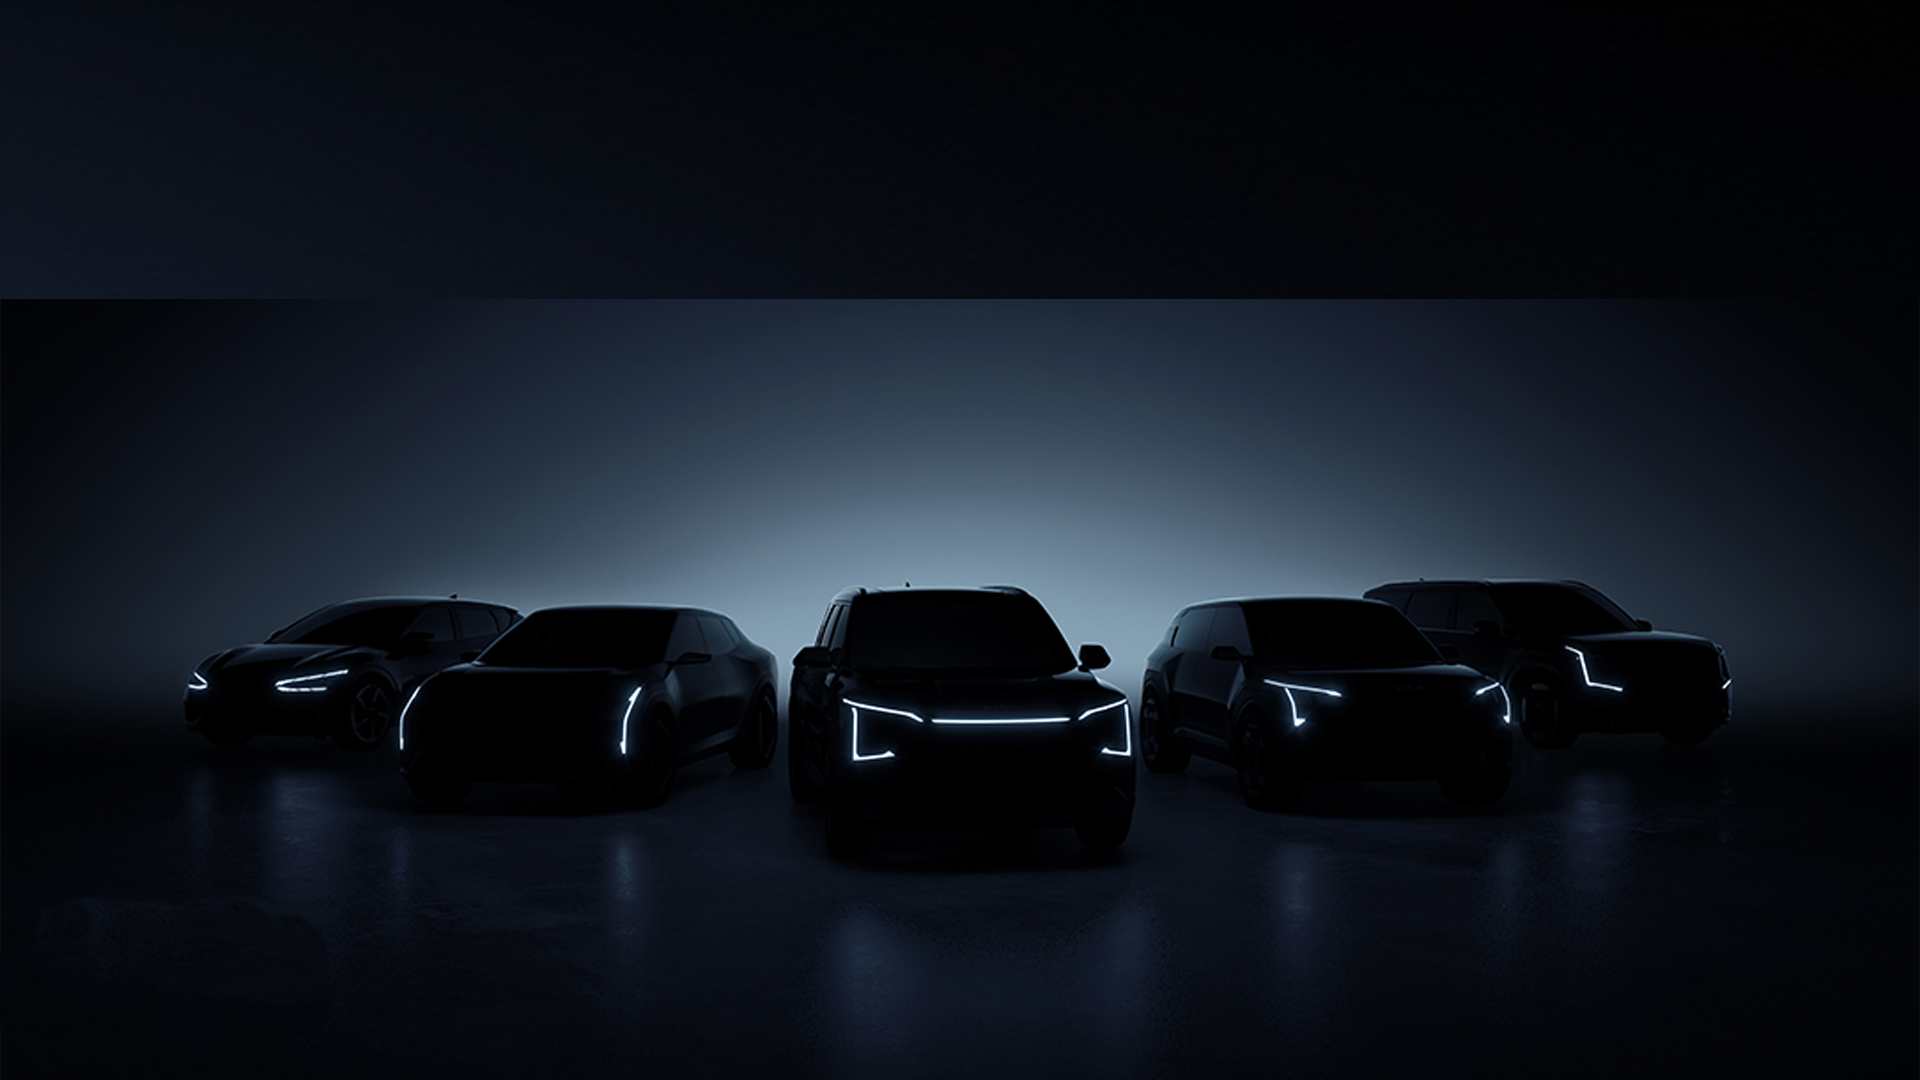 Kia teases promising new EV models ahead of imminent launch event ...